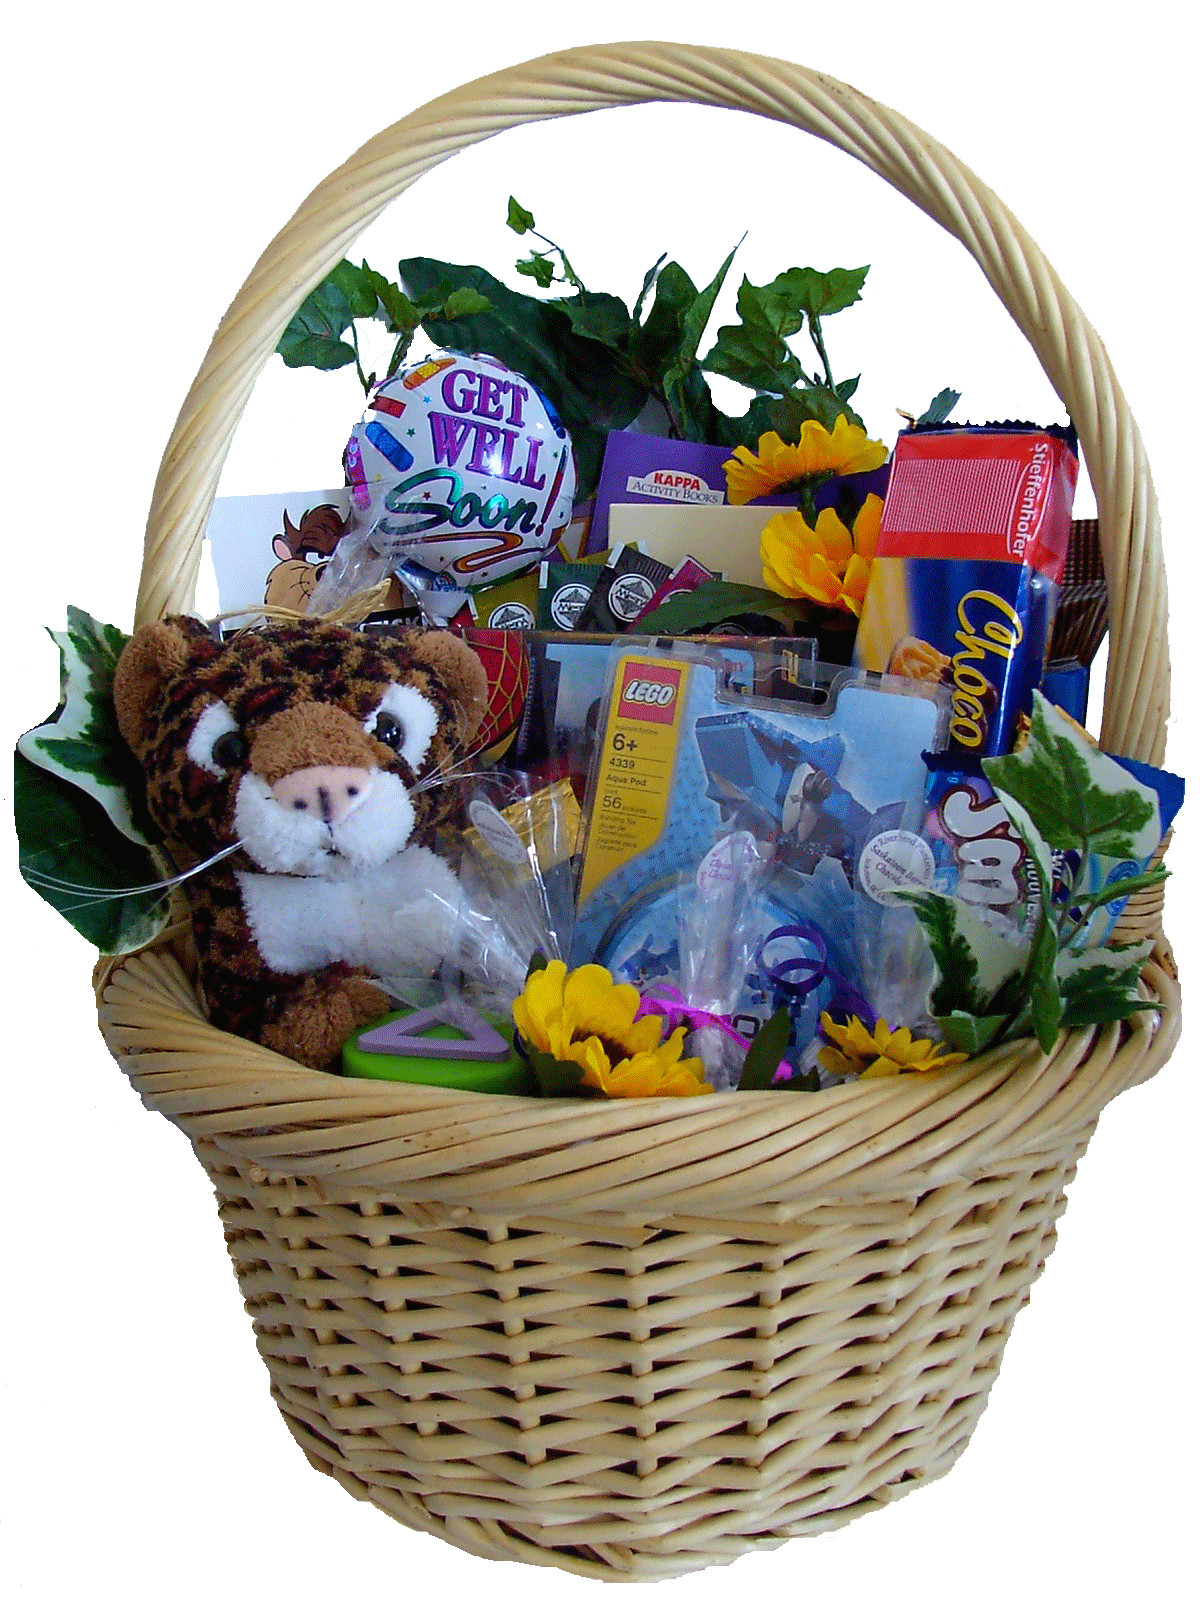 Get Well Gifts For Kids
 Kids Time Gift Basket Gift Bag for Kids Children Gifts